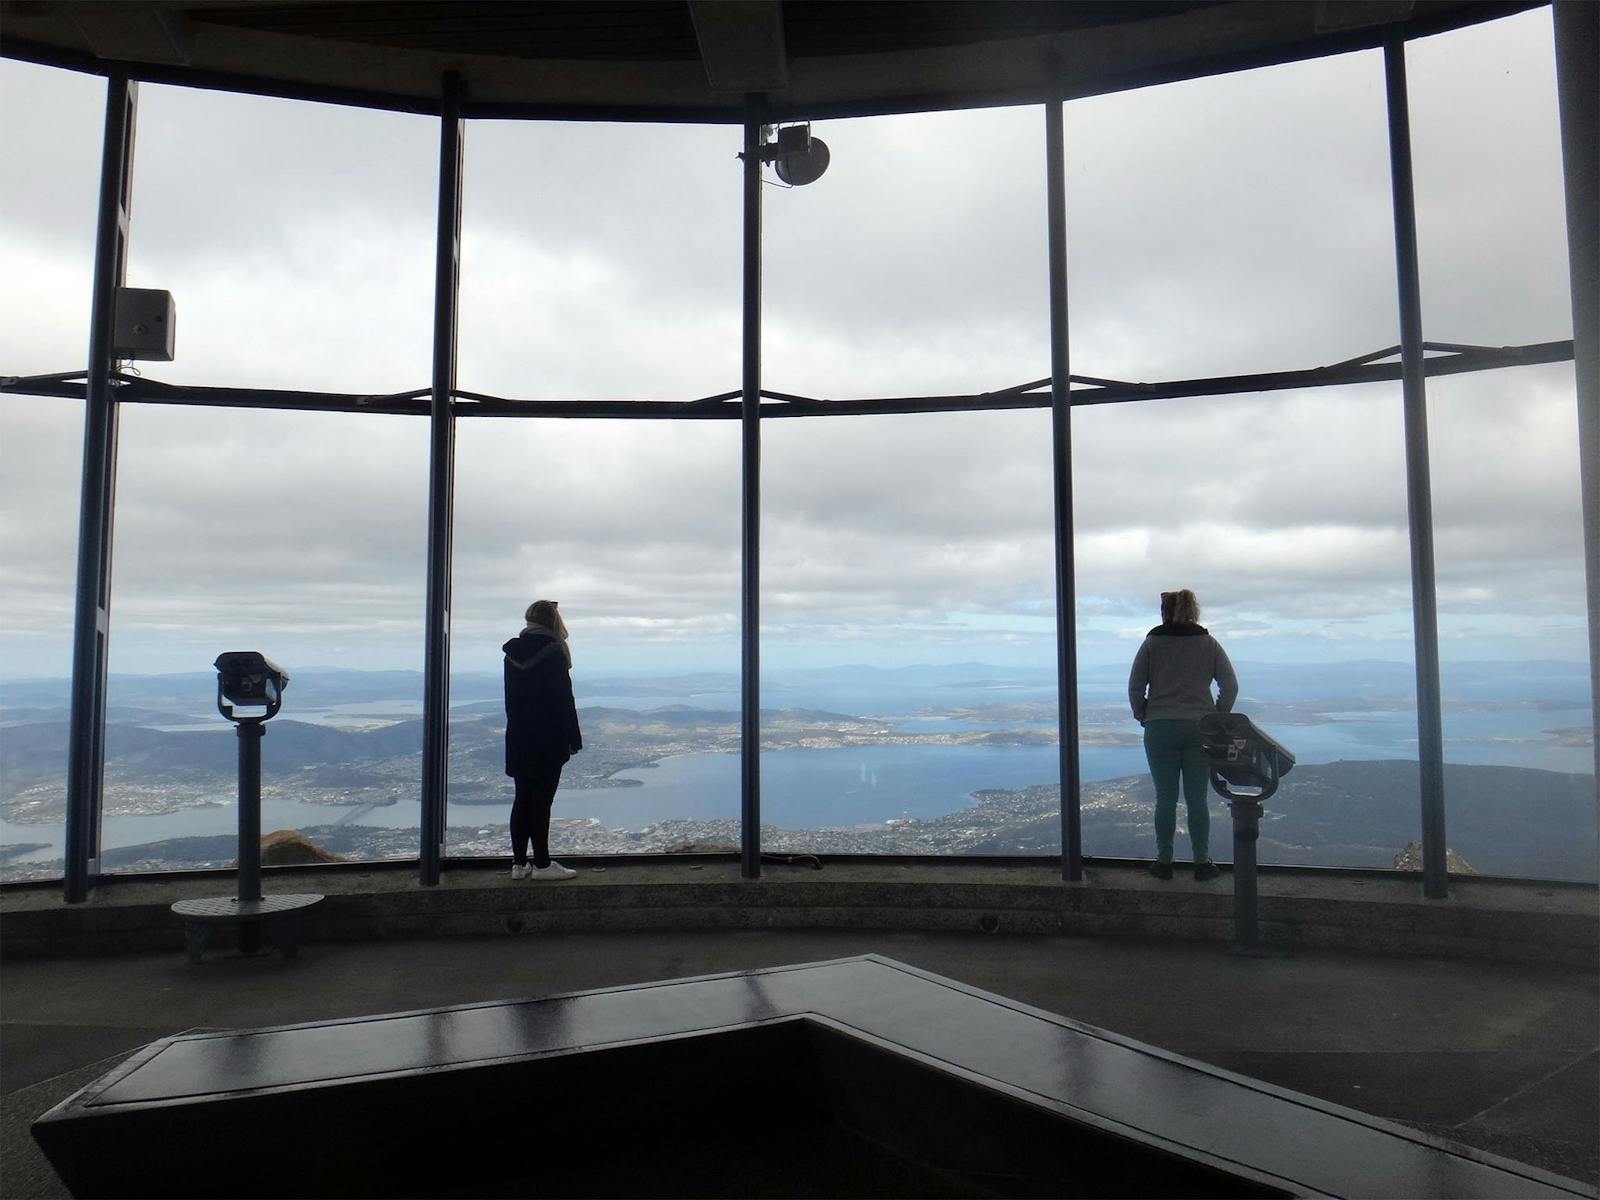 Passengers standing inside the Observation Shelter and looking out at the views over Hobart.